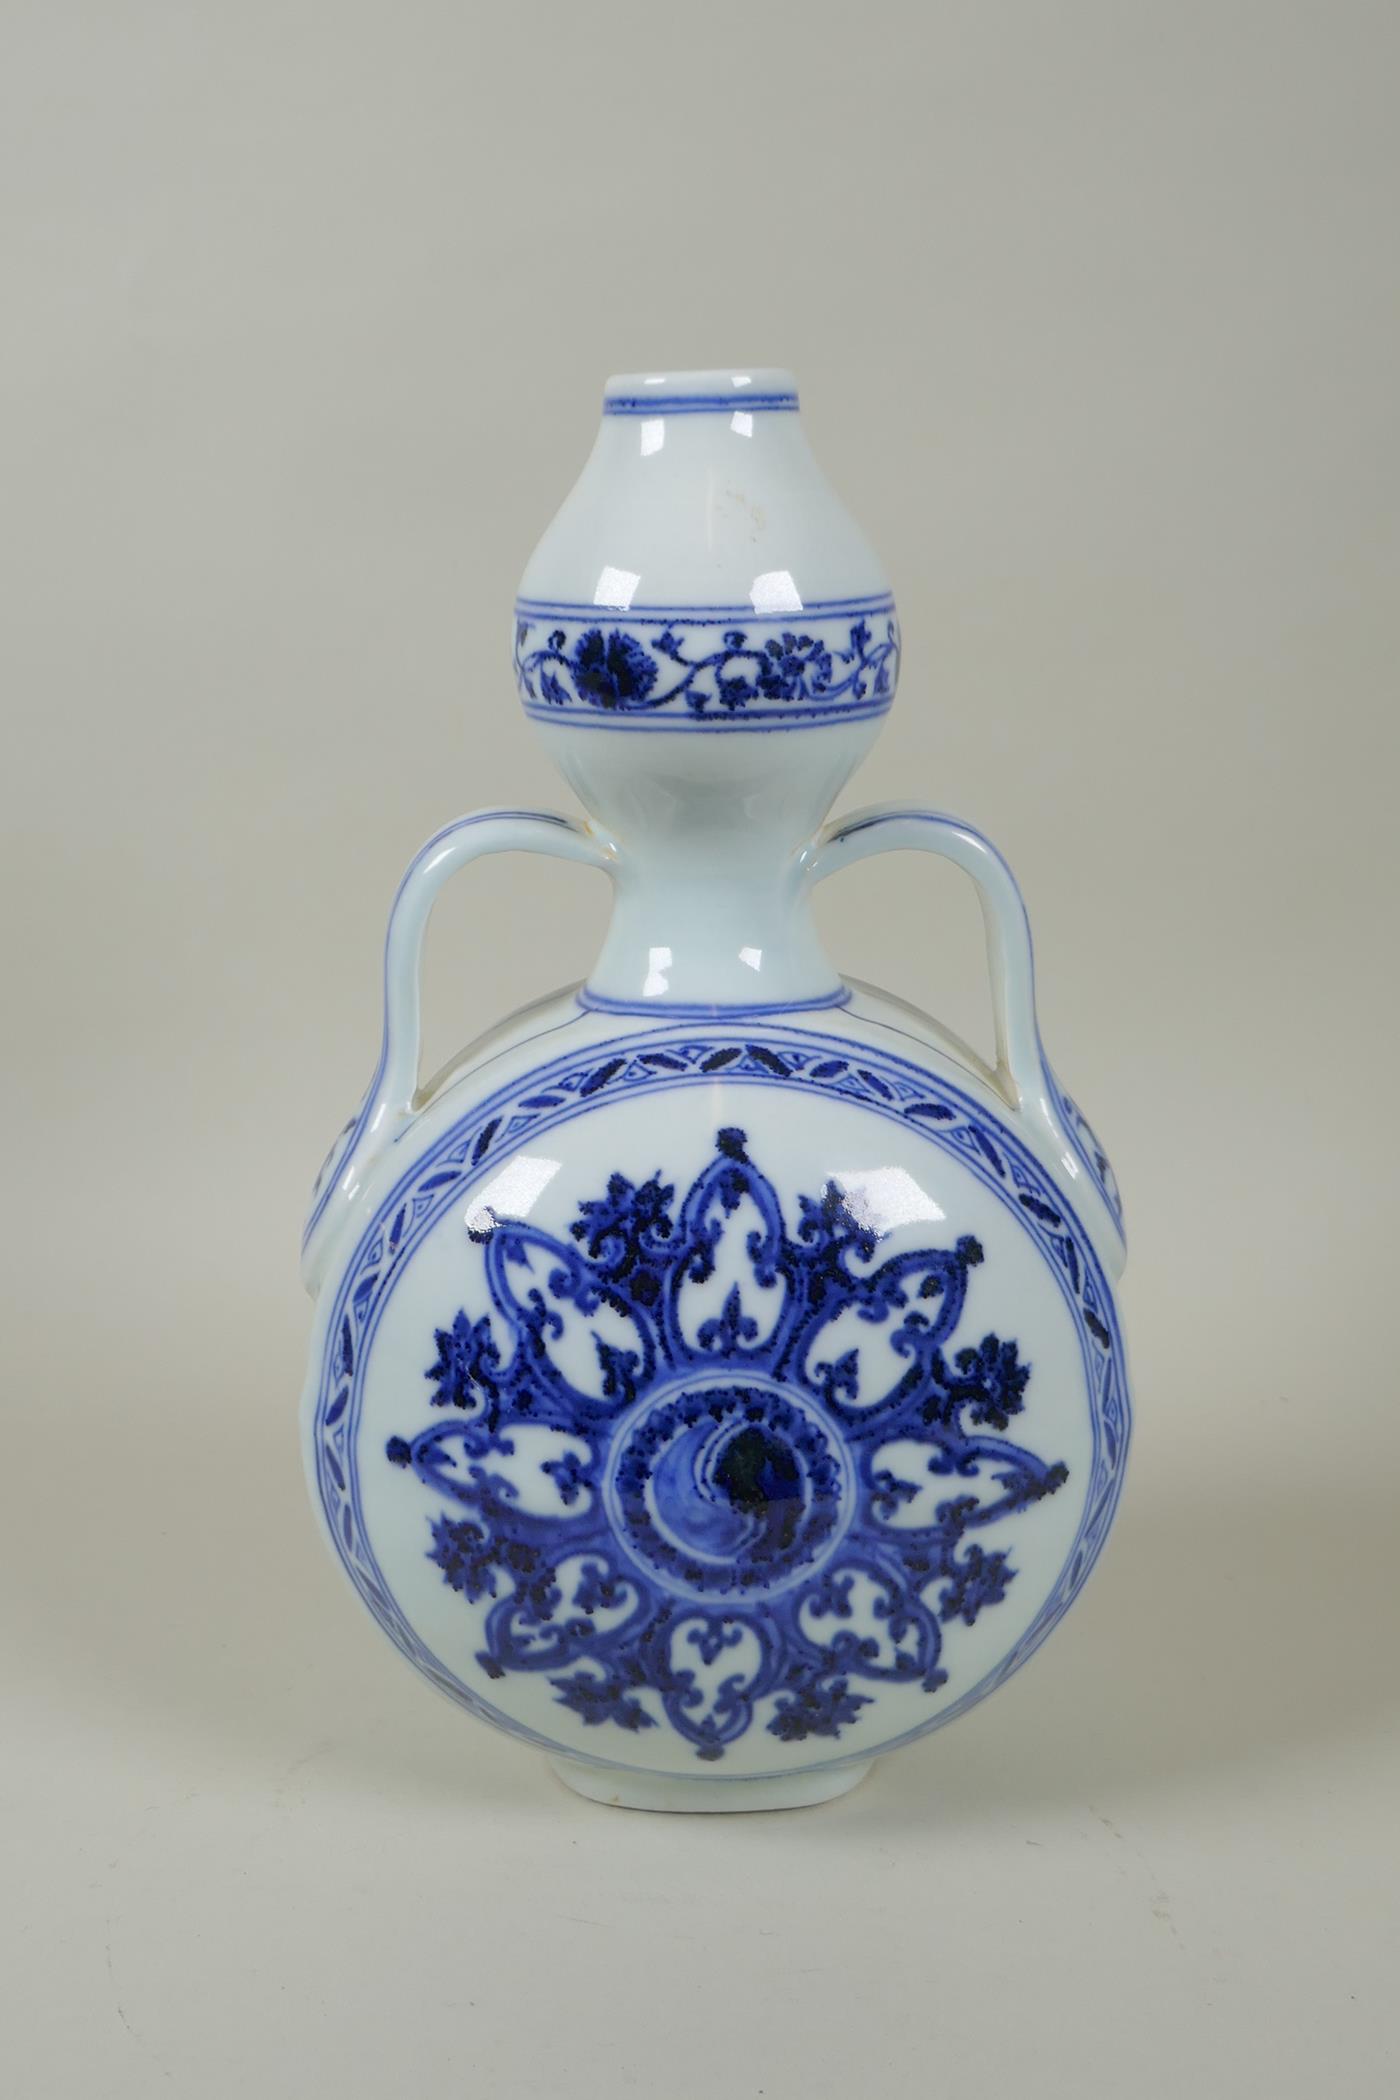 A Chinese blue and white porcelain garlic head shaped flask with two handles and yin yang - Image 3 of 6